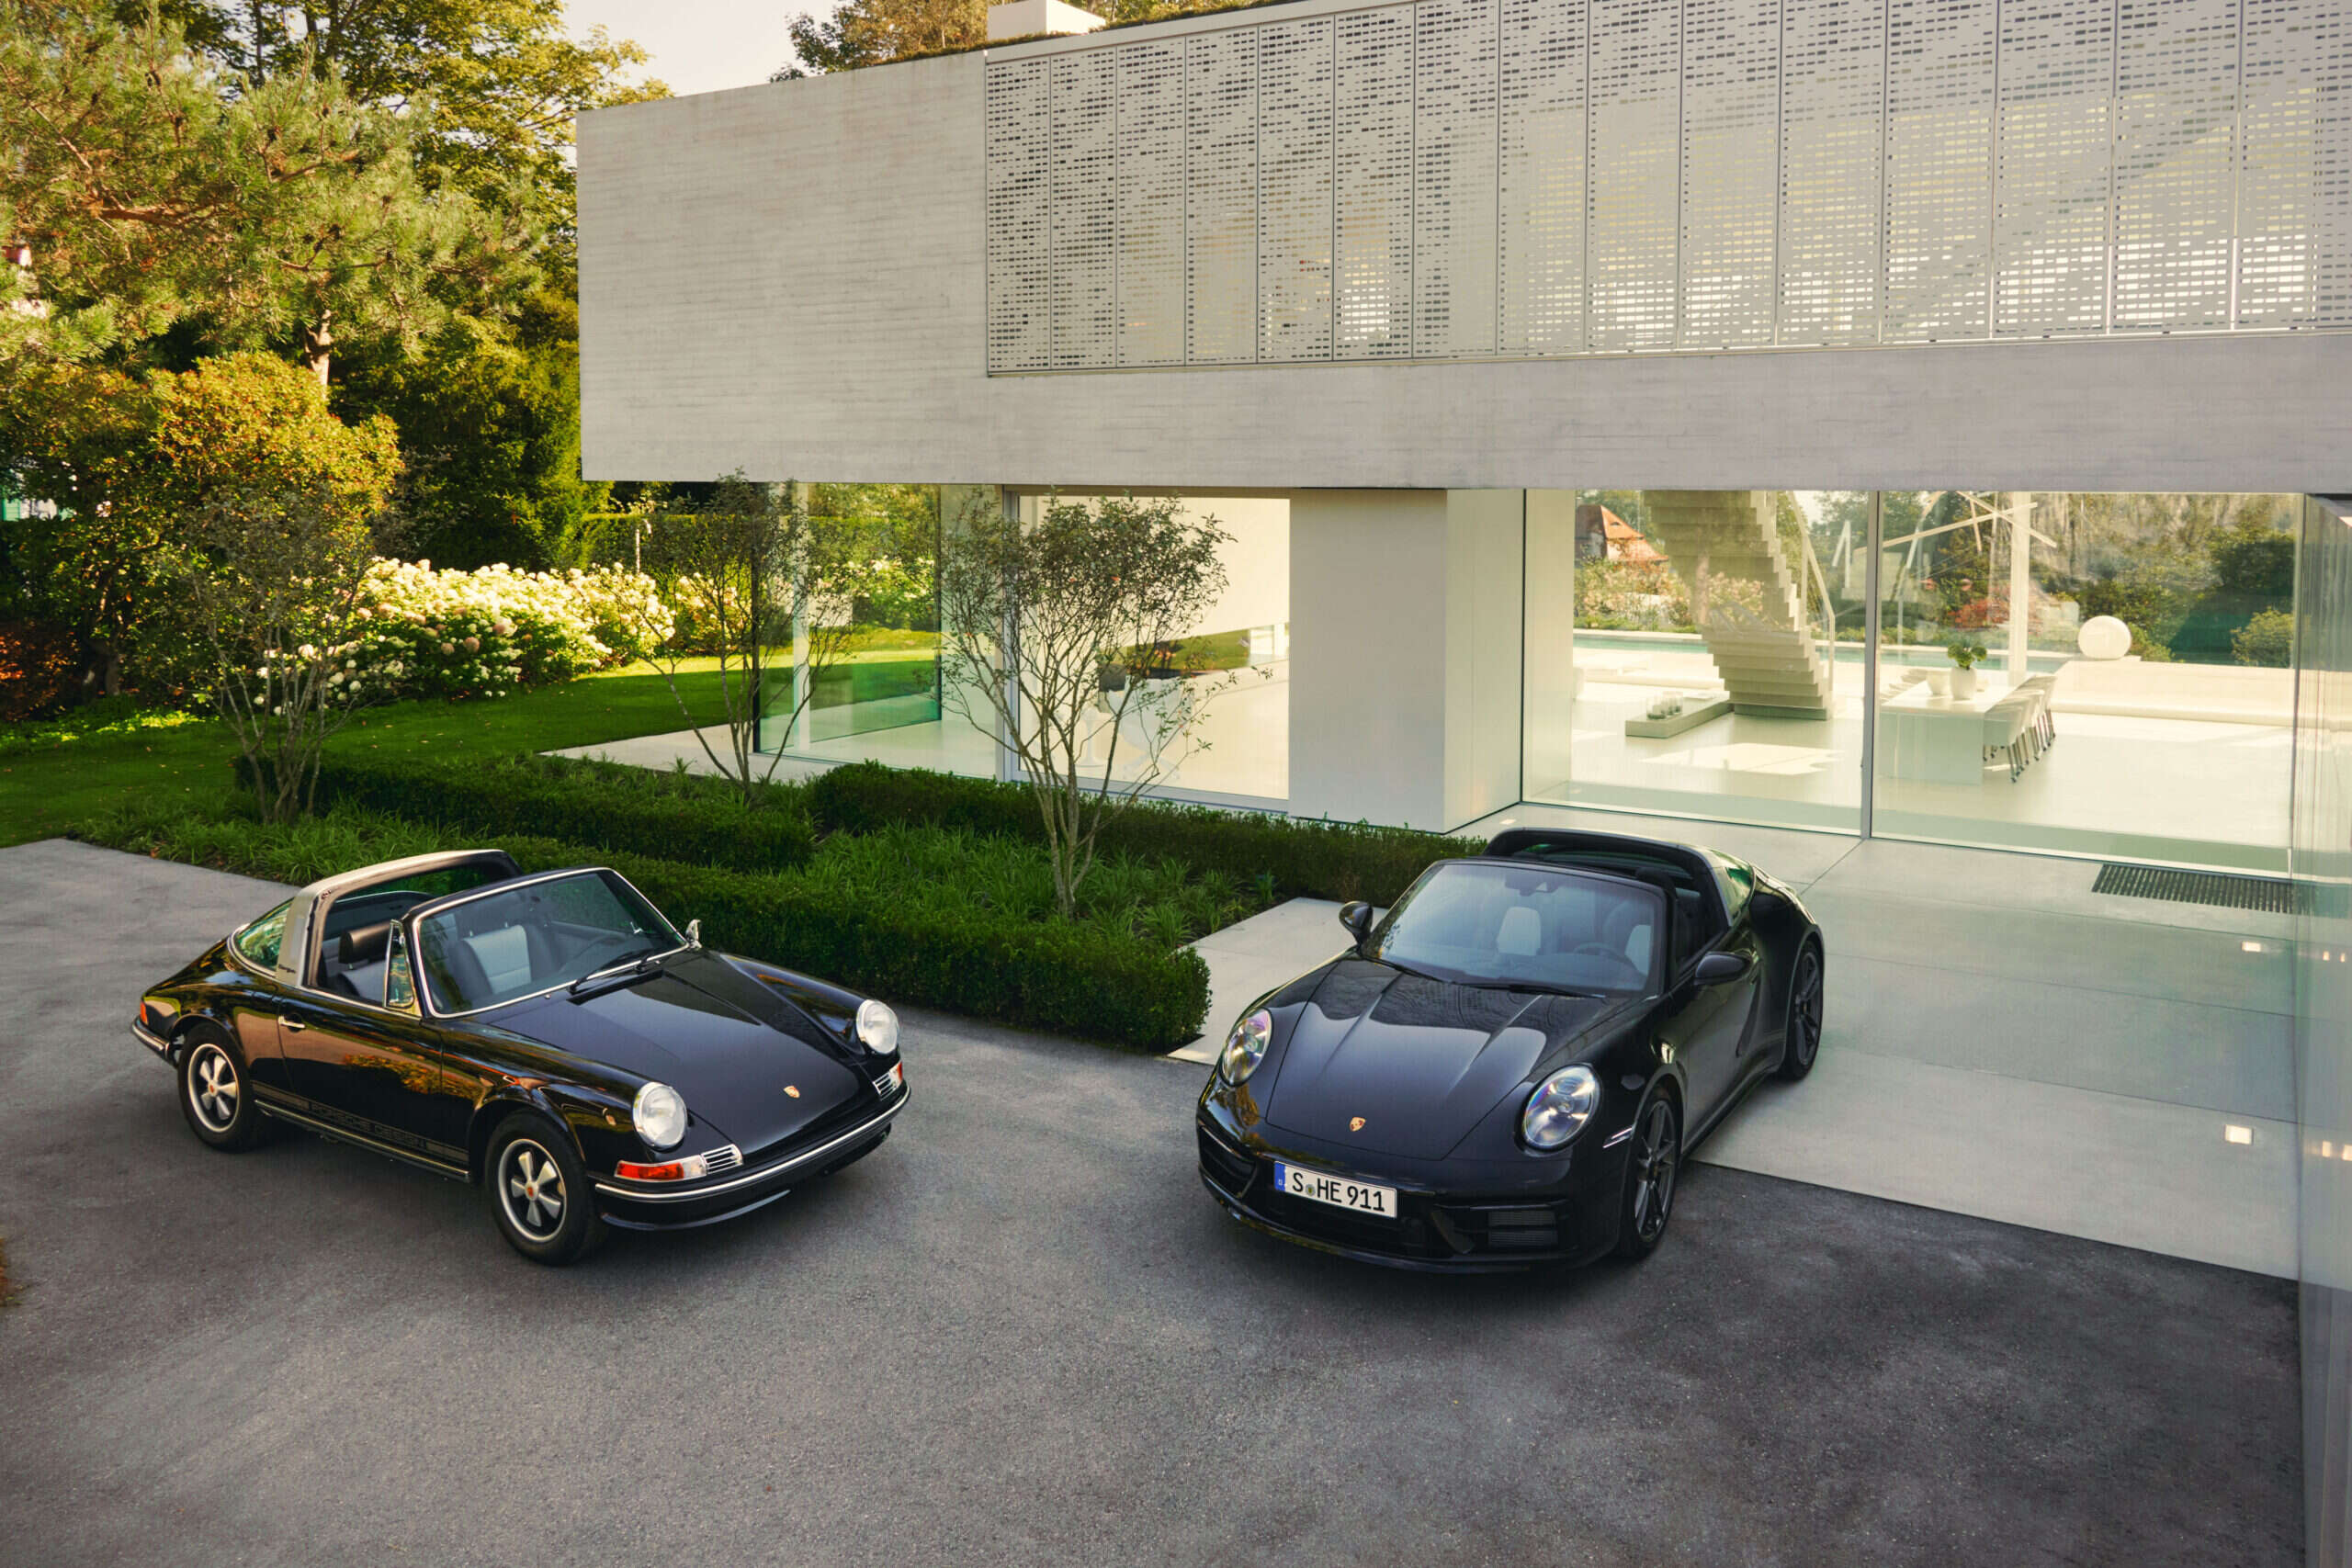 Porsche Design Reflects on 50 Years of Innovation